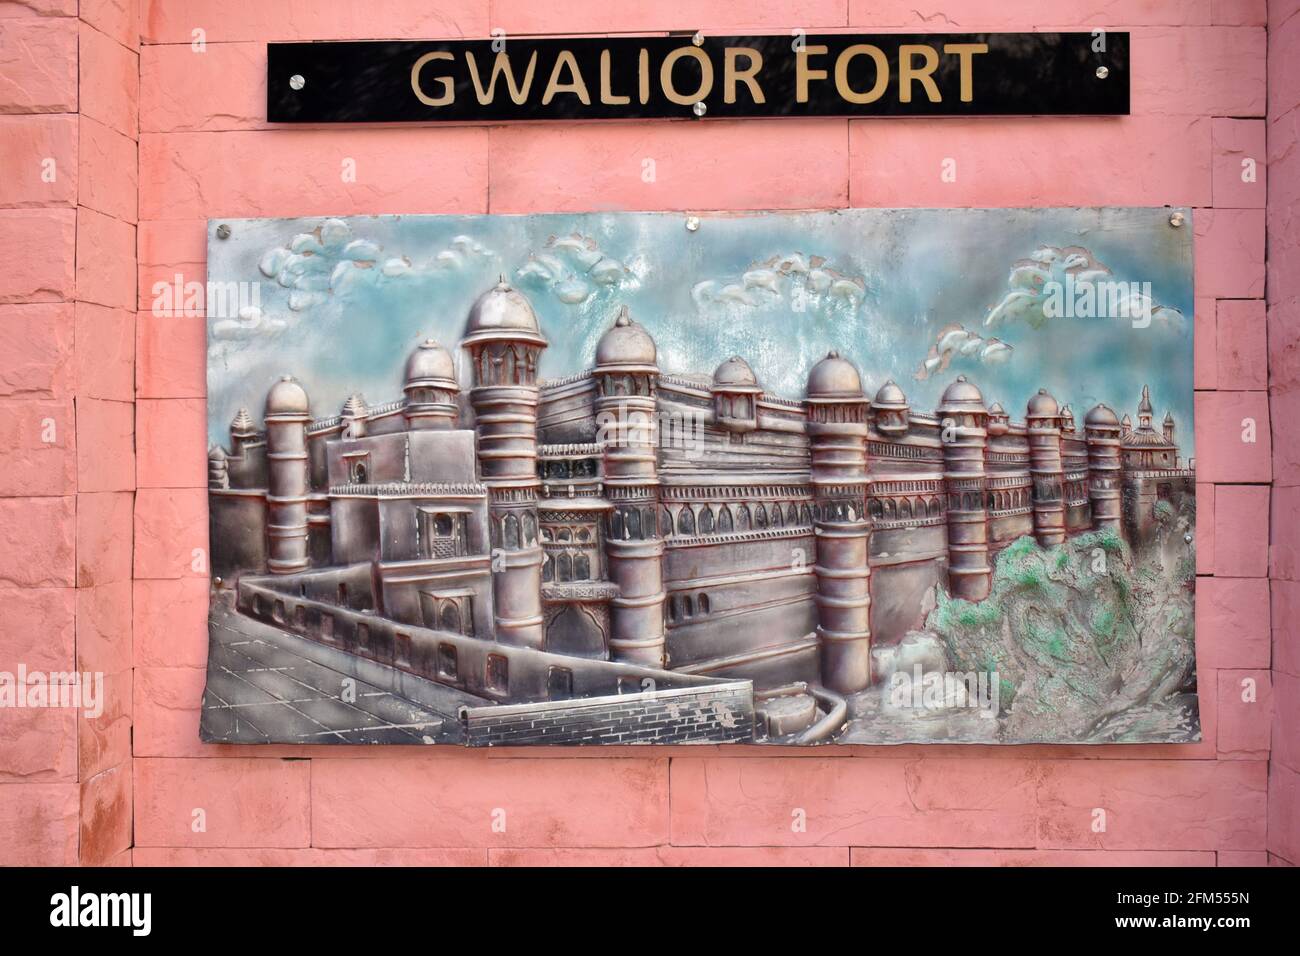 Gwalior Fort Sculpture wall relief at Museum - National War Memorial Southern Command Pune, Maharashtra, India Stock Photo